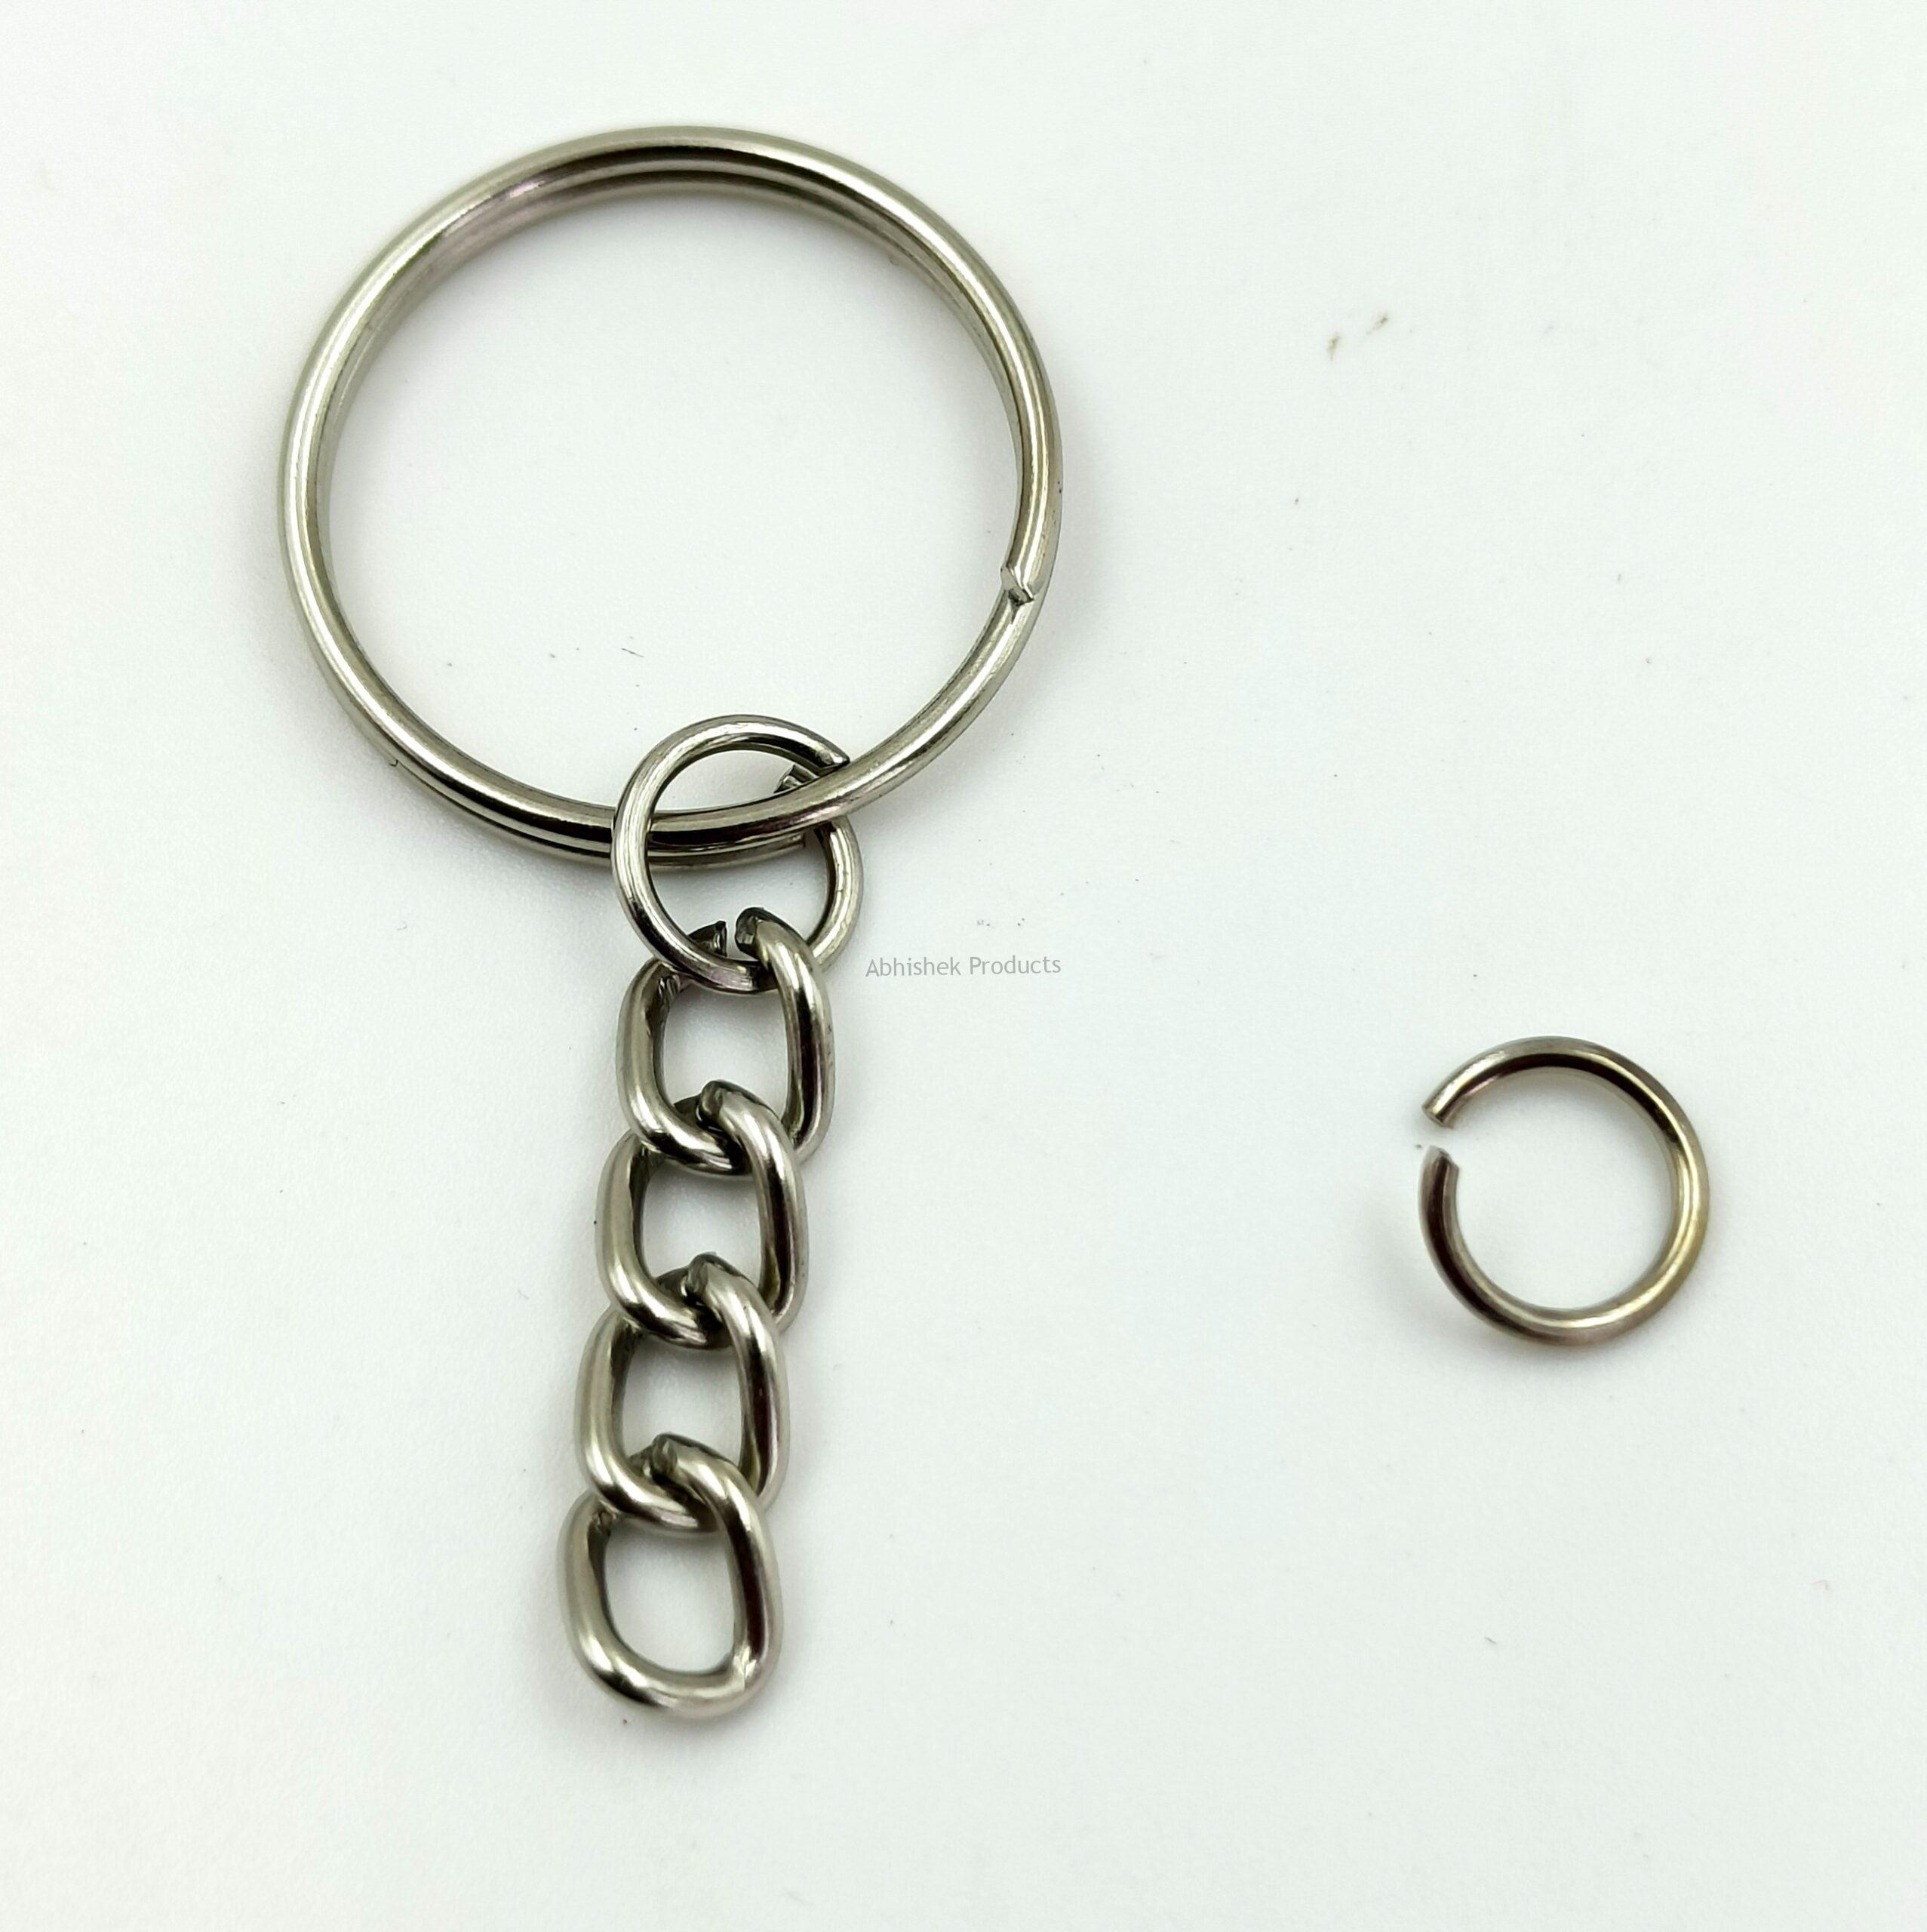 Manufacturer of Keychain Ring and Metal chain